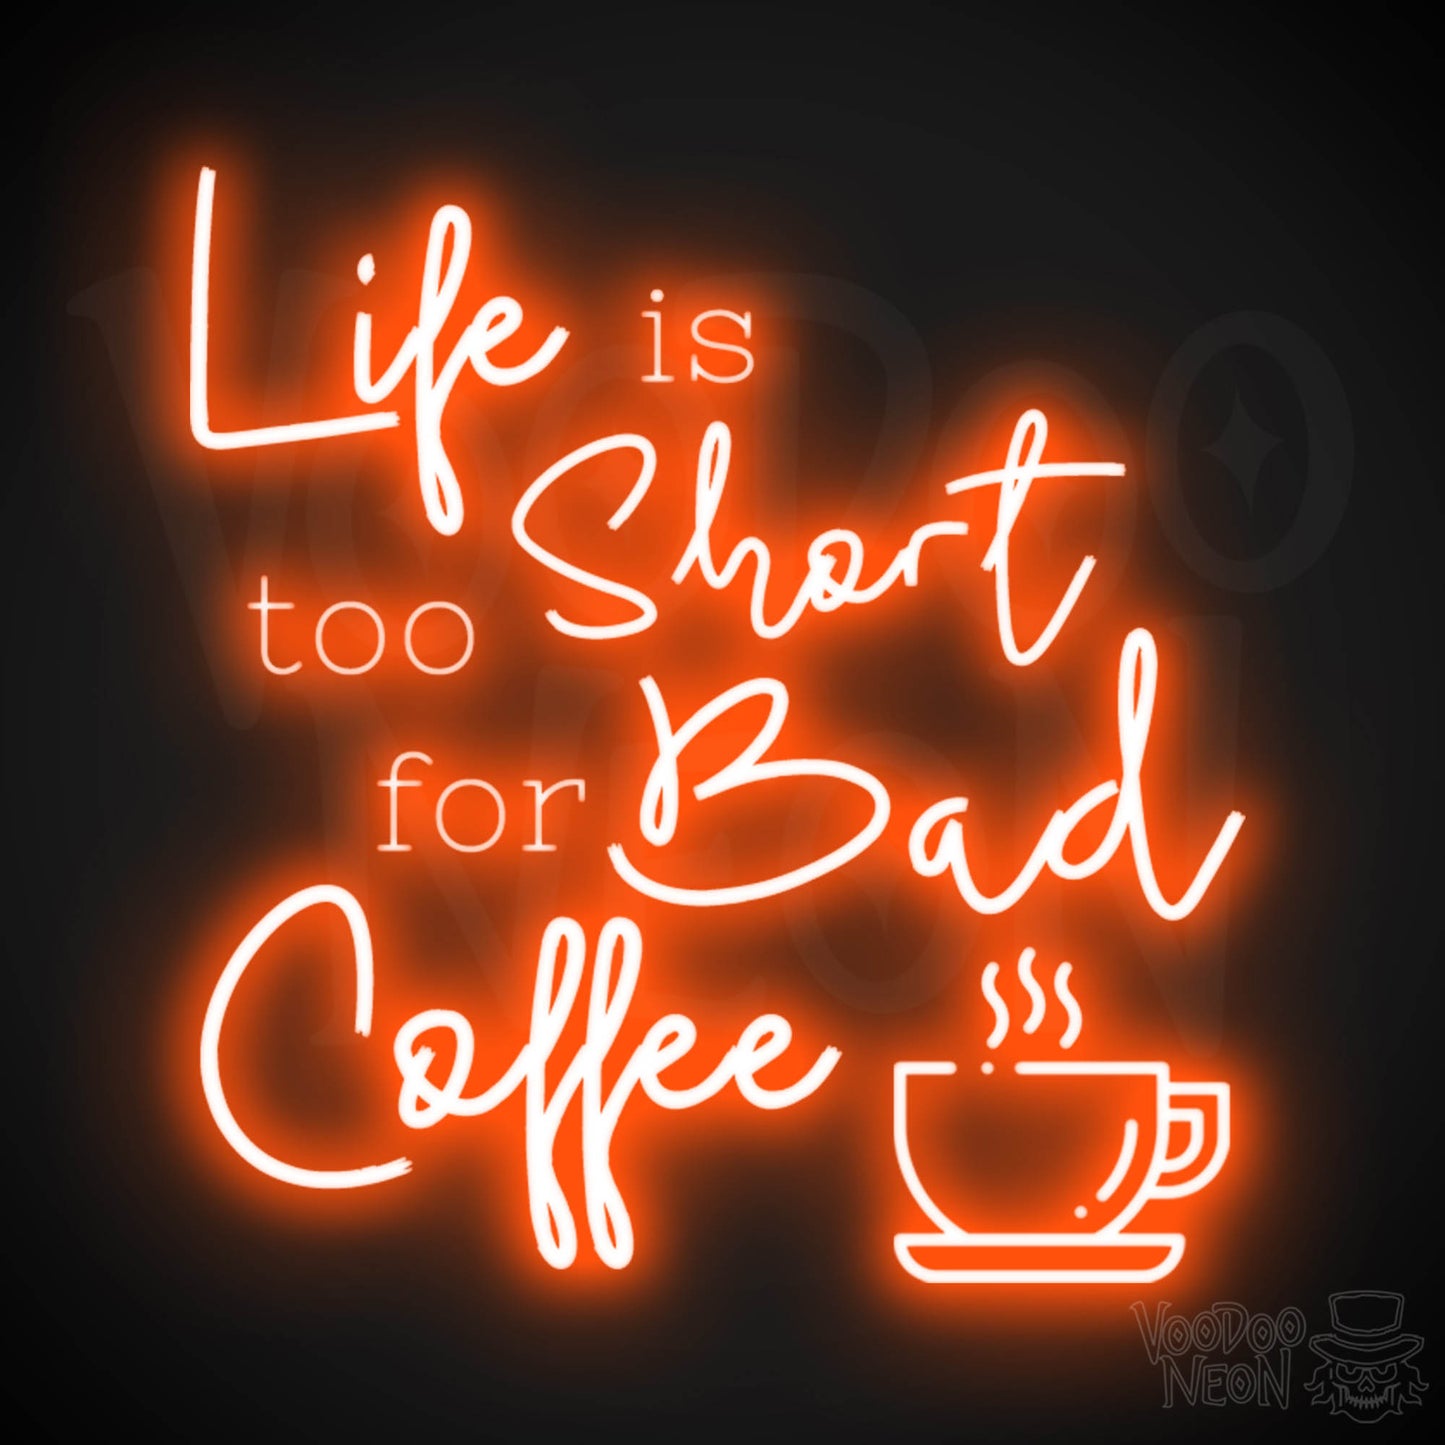 Life Is Too Short For Bad Coffee Neon Sign - Neon Life Is Too Short For Bad Coffee Sign - LED Neon Wall Art - Color Orange